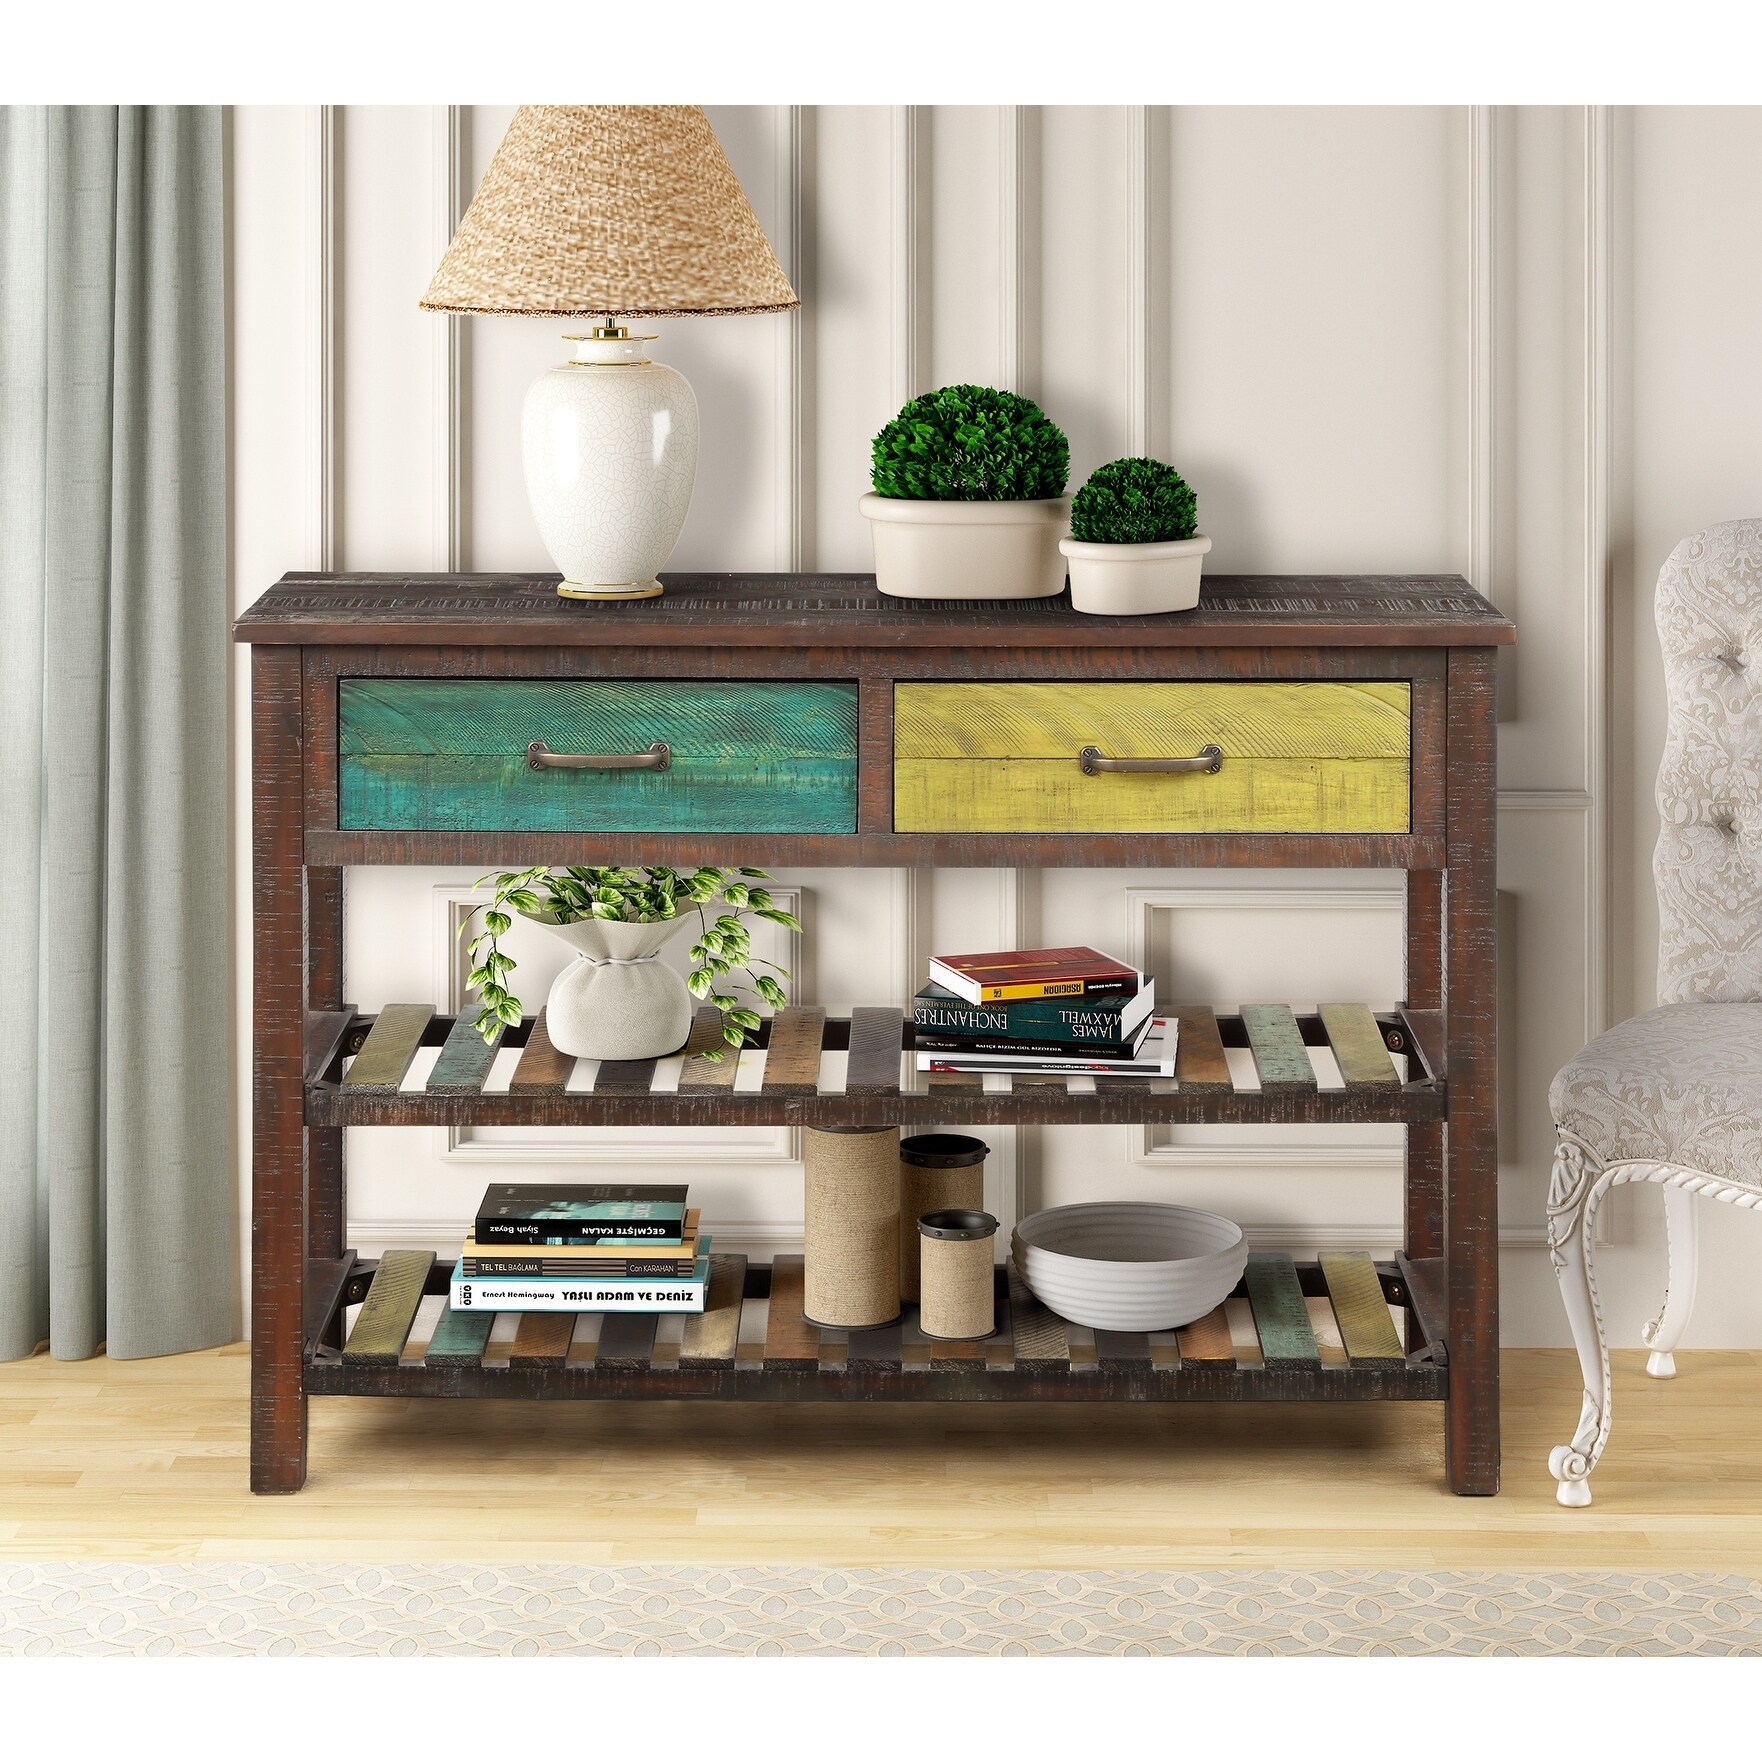 The Curated Nomad Keisa Retro Console Table With Drawers And Shelves